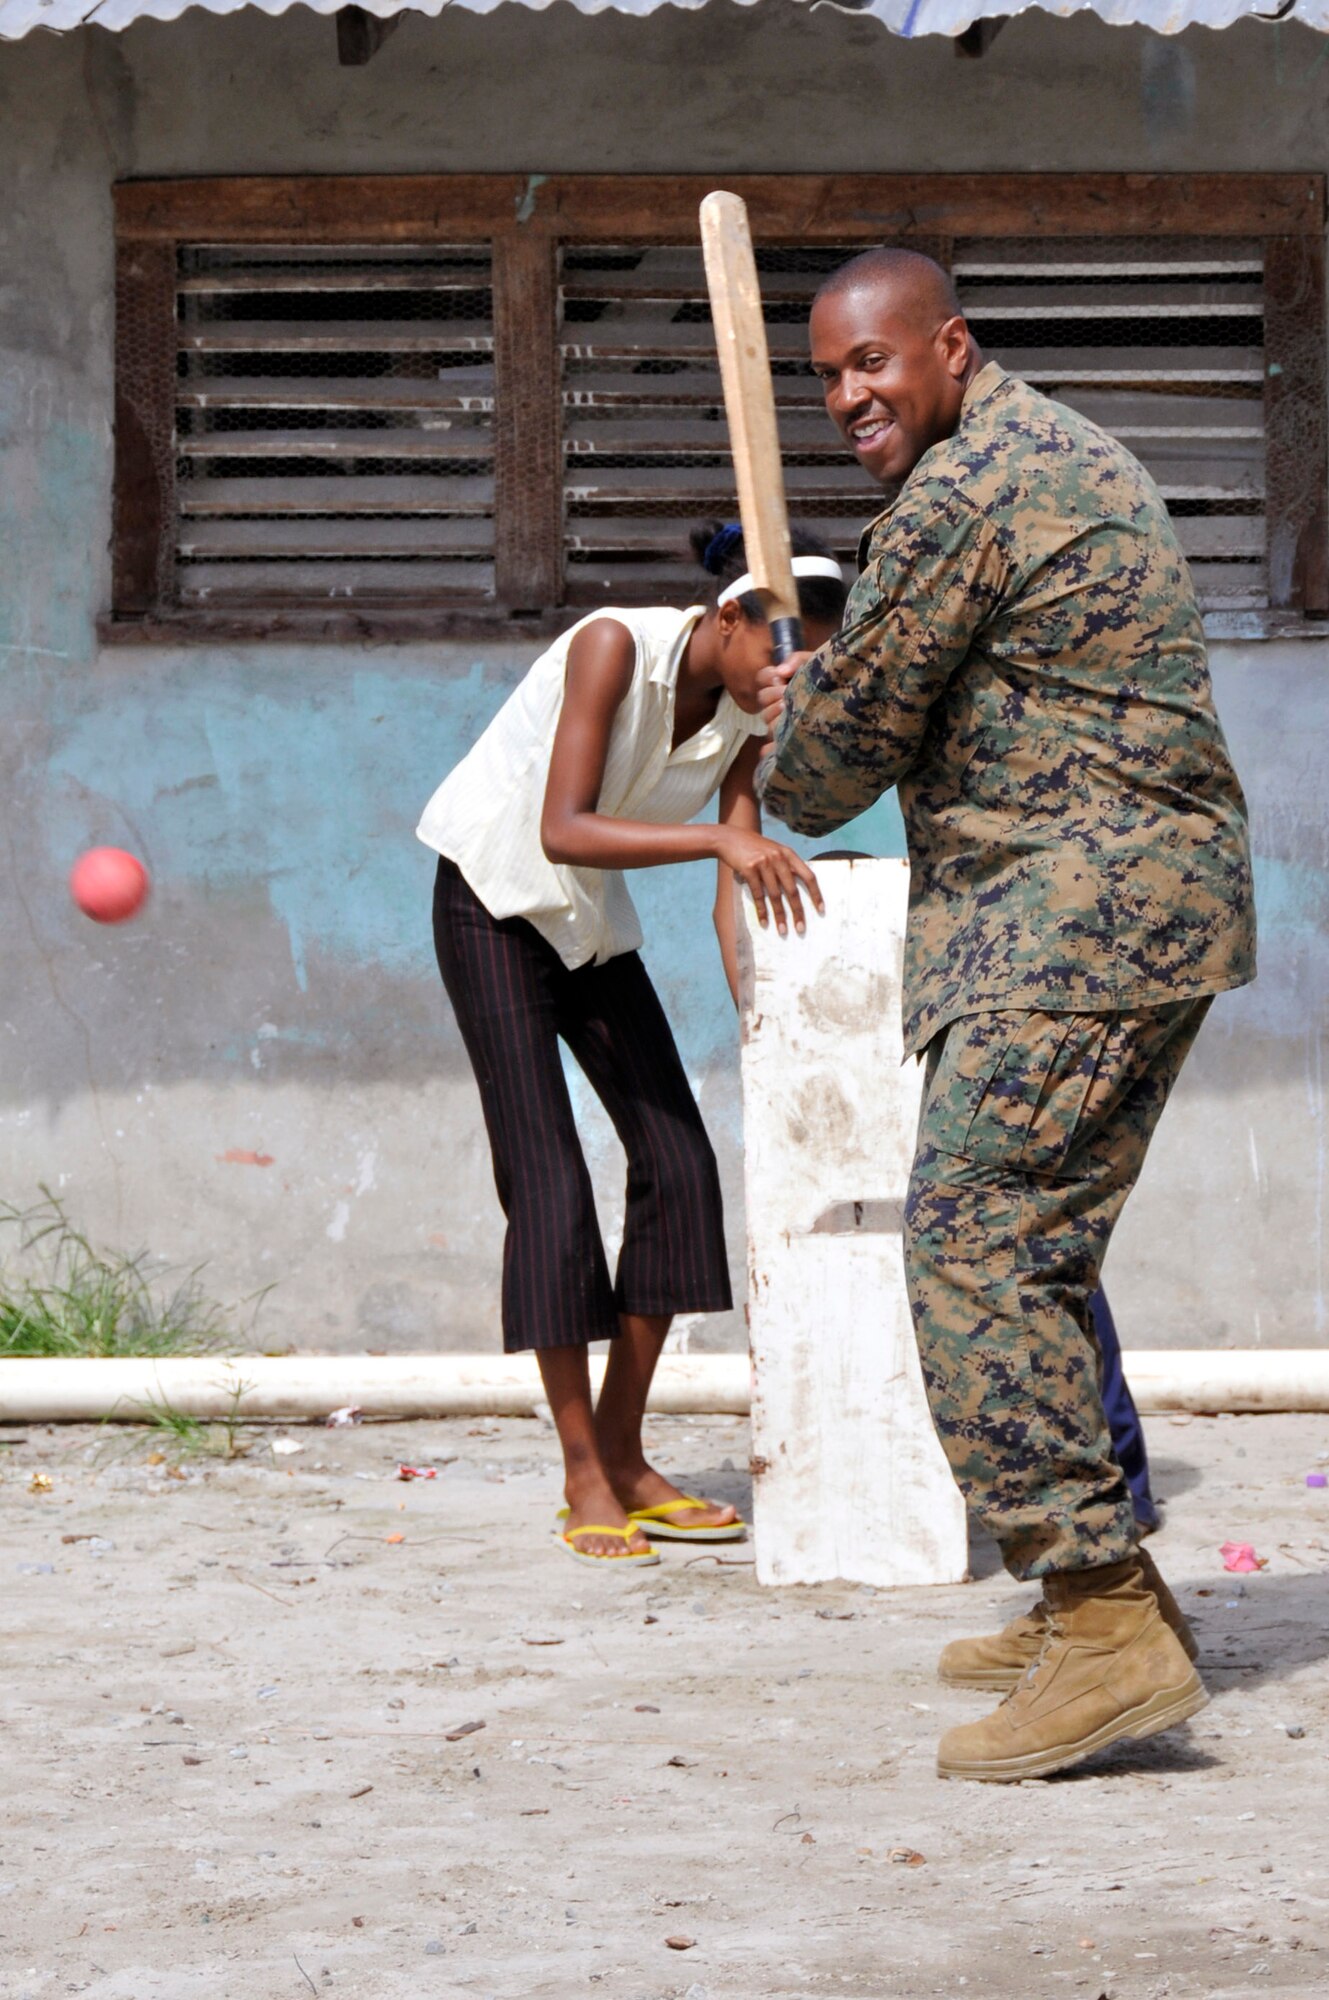 Master Gunnery Sgt. Artis Weaver, Joint Task Force Guyana chief enlisted officer, plays a game of cricket with the children at Joshua's Place orphanage July 5, 2009 in Georgetown, Guyana. Airmen, Marines, and Soldiers visited the orphanage to find out what they could do to help the orphanage. Master Gunnery Sgt. Weaver is deployed from Marine Aviation Logistics Squadron 49, Naval Air Station Willow Grove, and hails from Fort Washington, Maryland. (U.S. Air Force photo by Airman 1st Class Perry Aston)